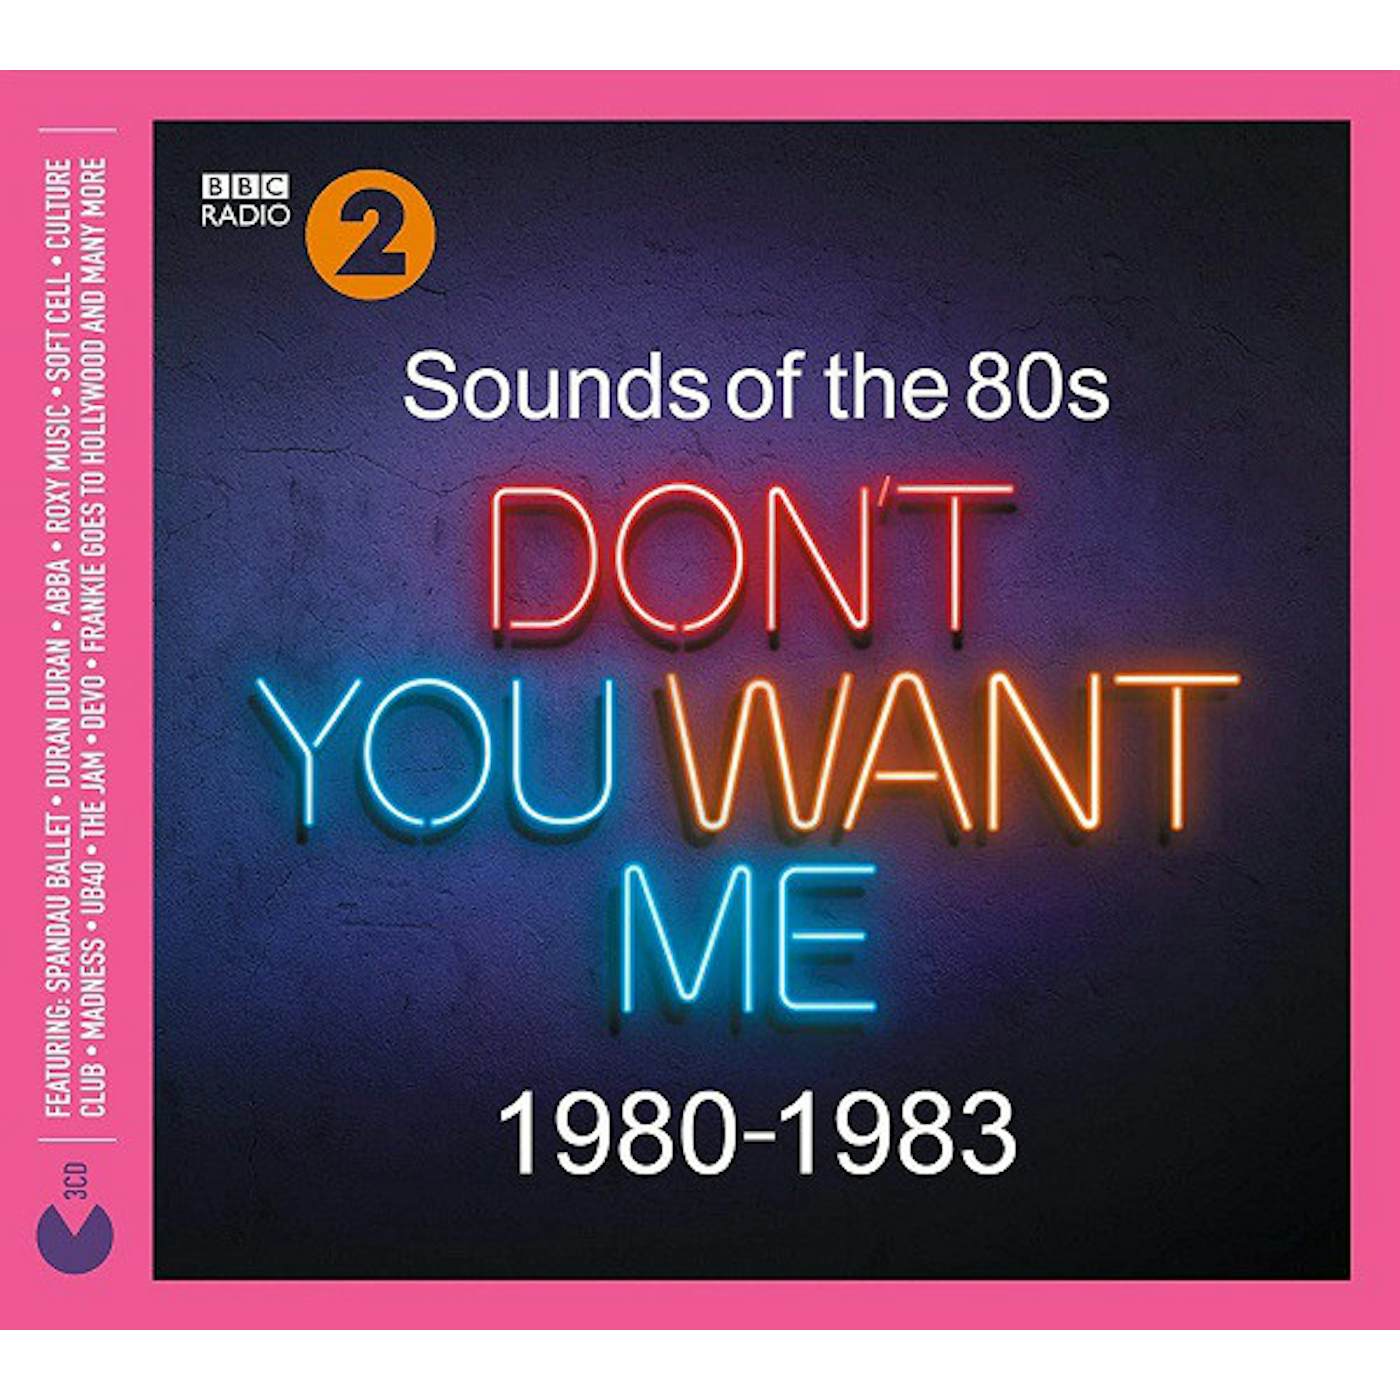 SOUNDS OF THE 80S: DON'T YOU WANT ME (1980-1983) Vinyl Record